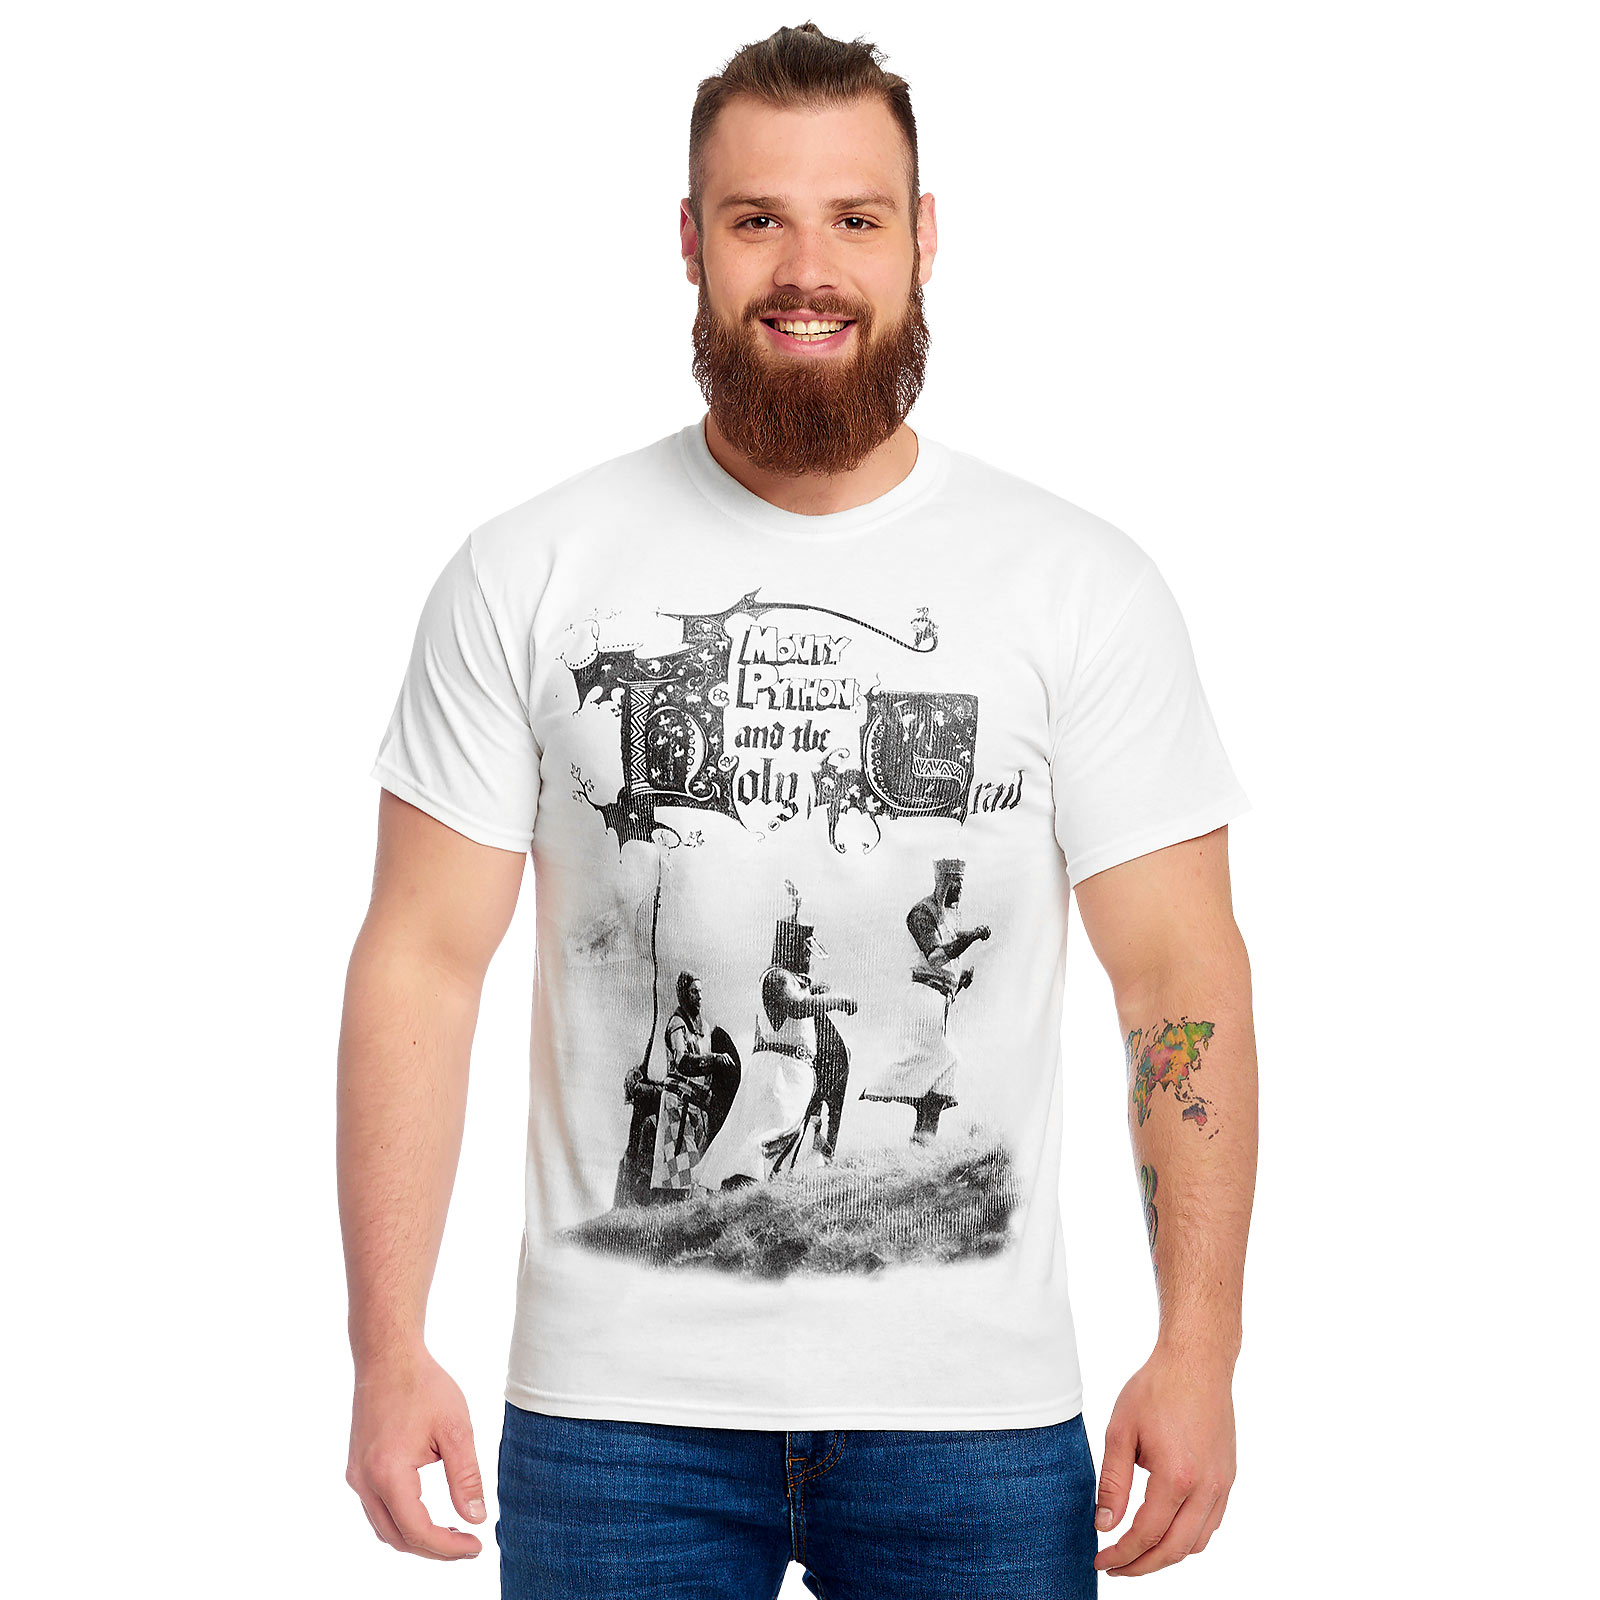 Monty Python - The Knights of the Coconut T-Shirt white